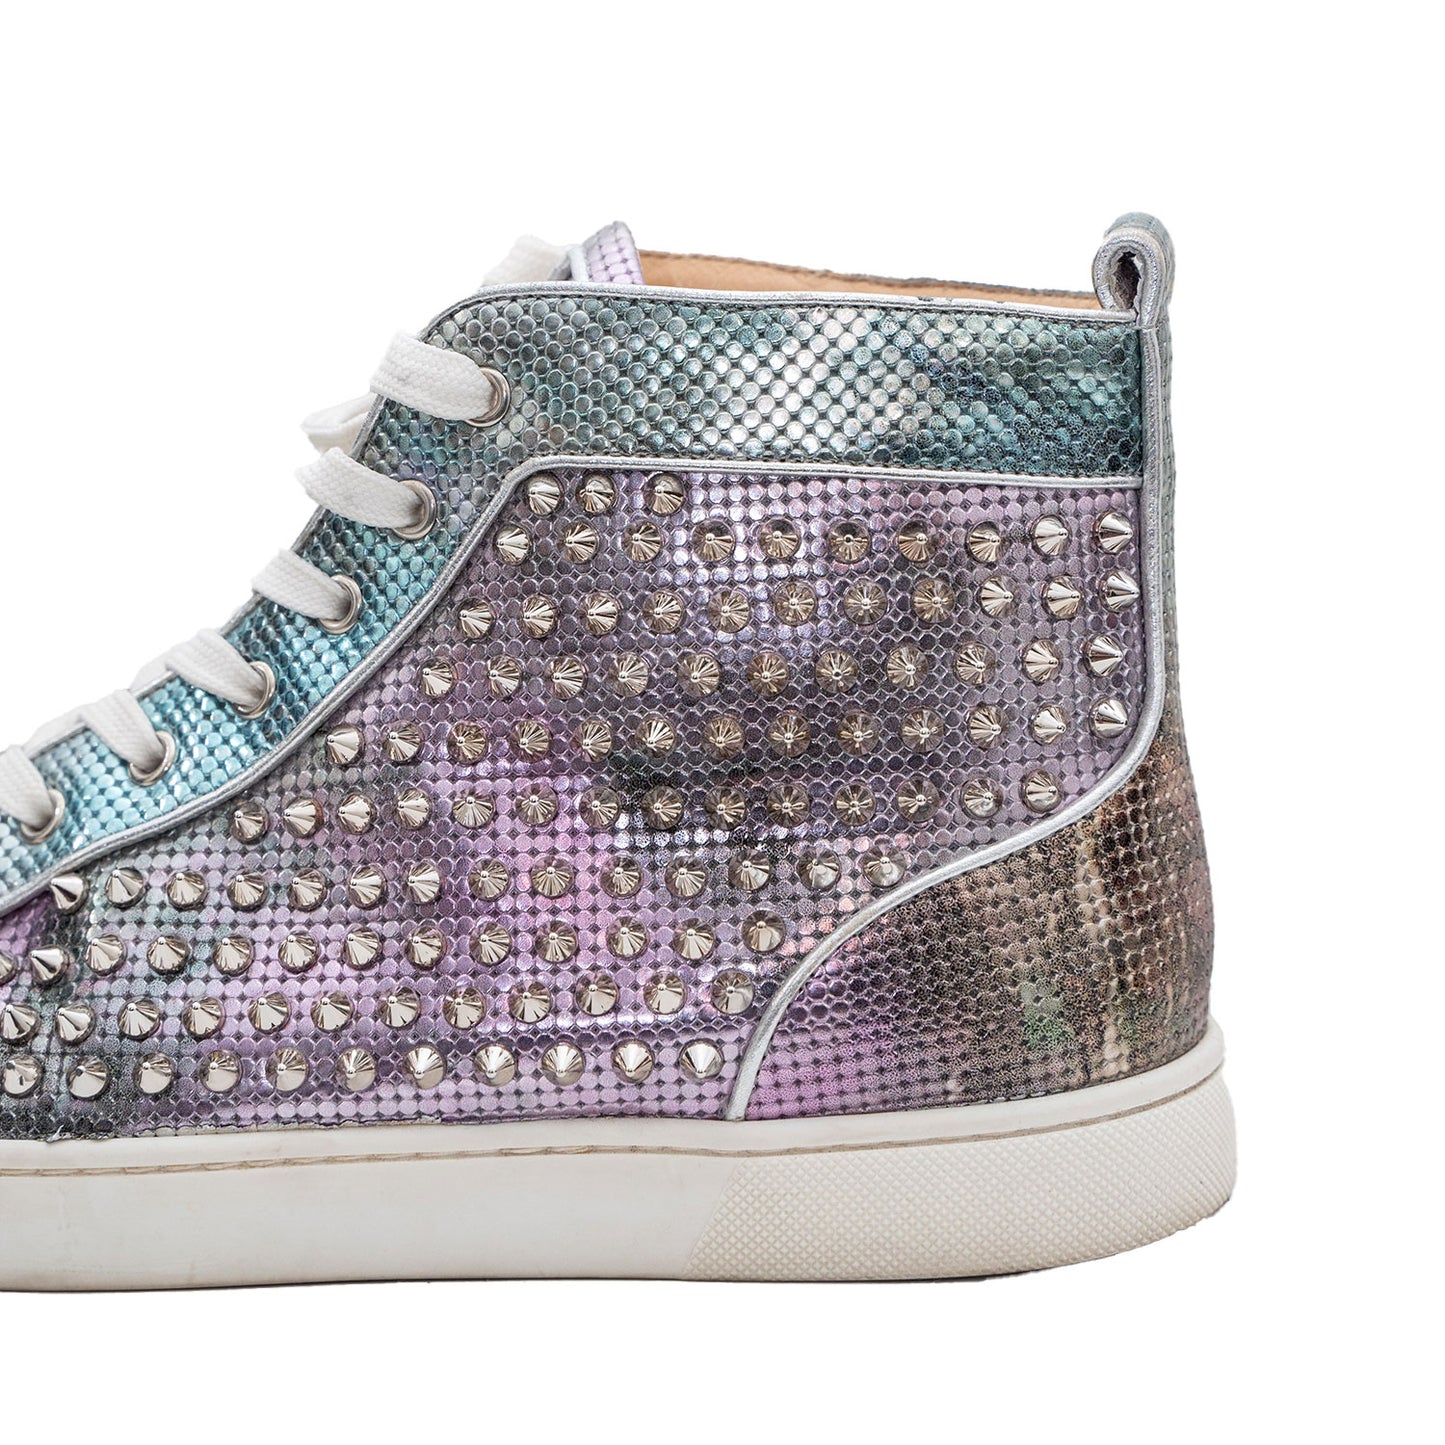 Christian Louboutin Men's Silver Spiked Mid-Top Sneaker